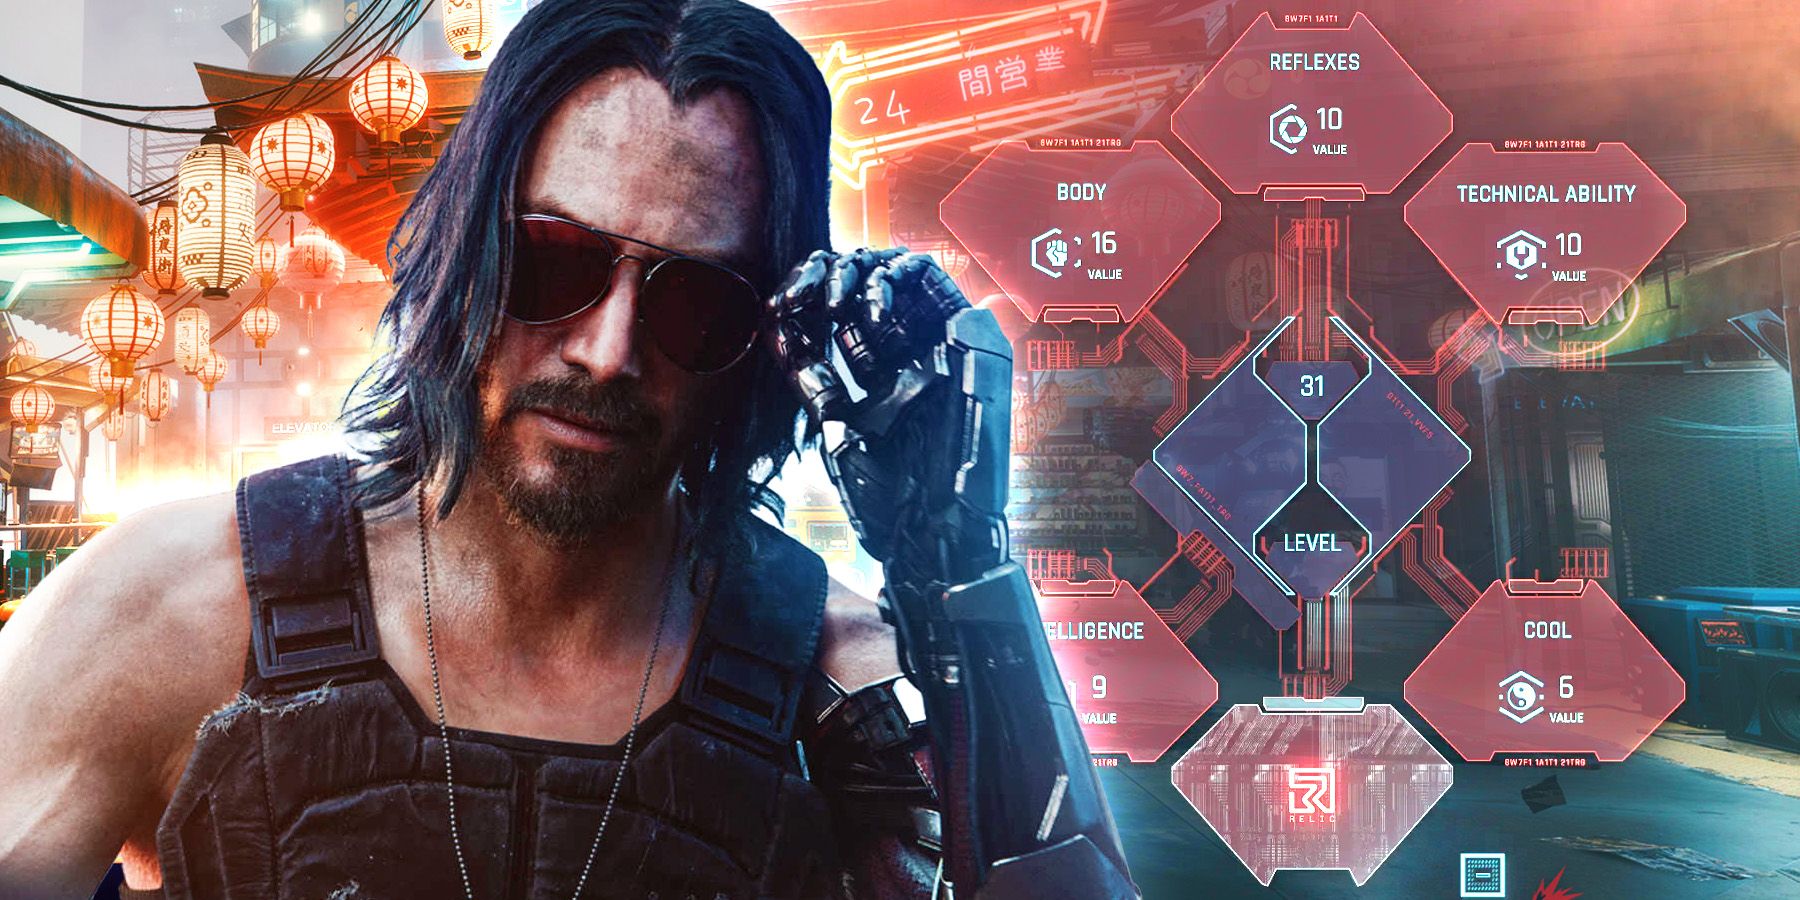 Johnny Silverhand adjusts his sunglasses in front of Cyberpunk 2077's base stat tree.